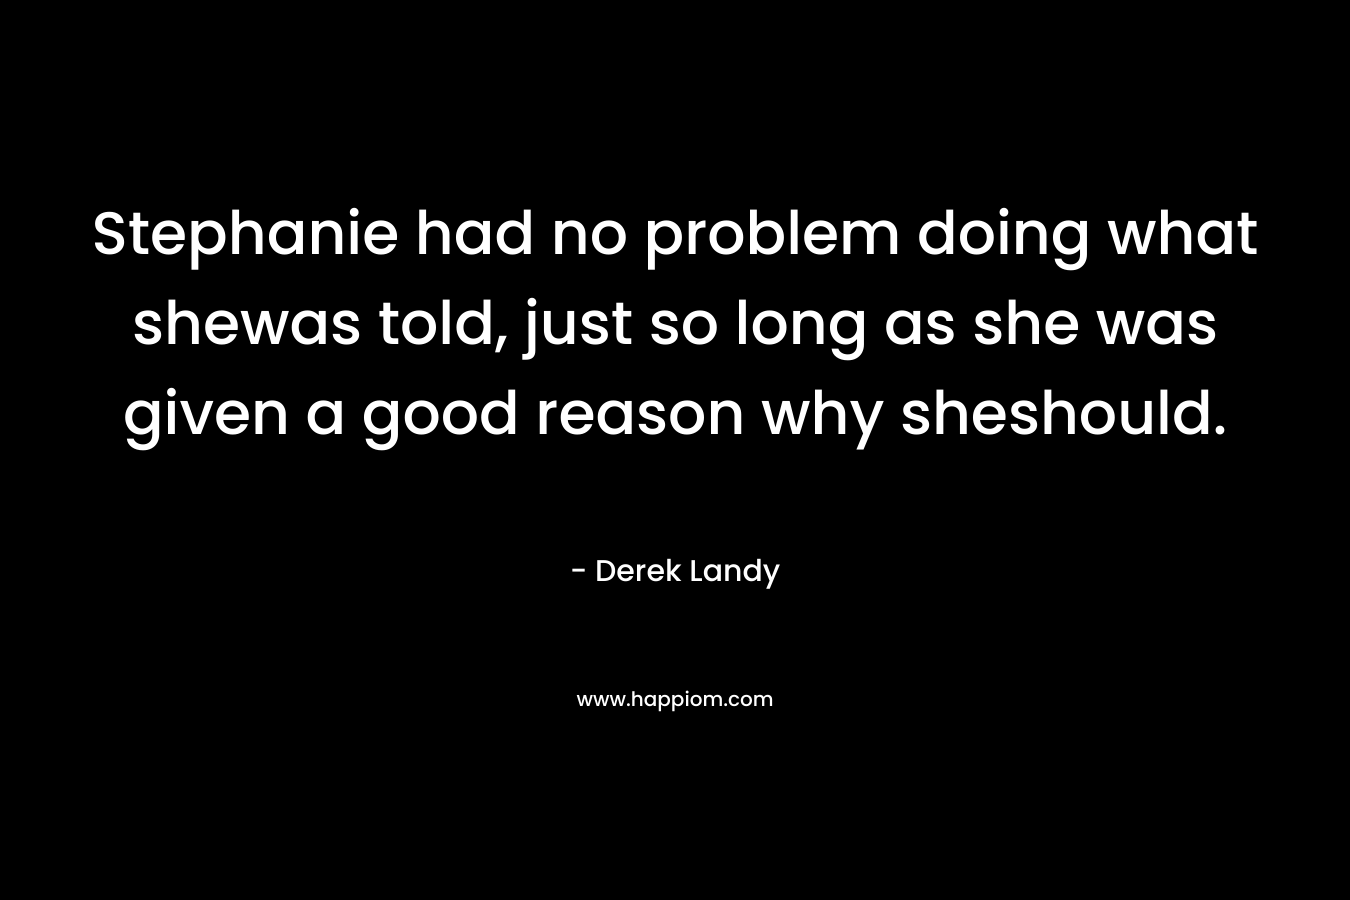 Stephanie had no problem doing what shewas told, just so long as she was given a good reason why sheshould. – Derek Landy